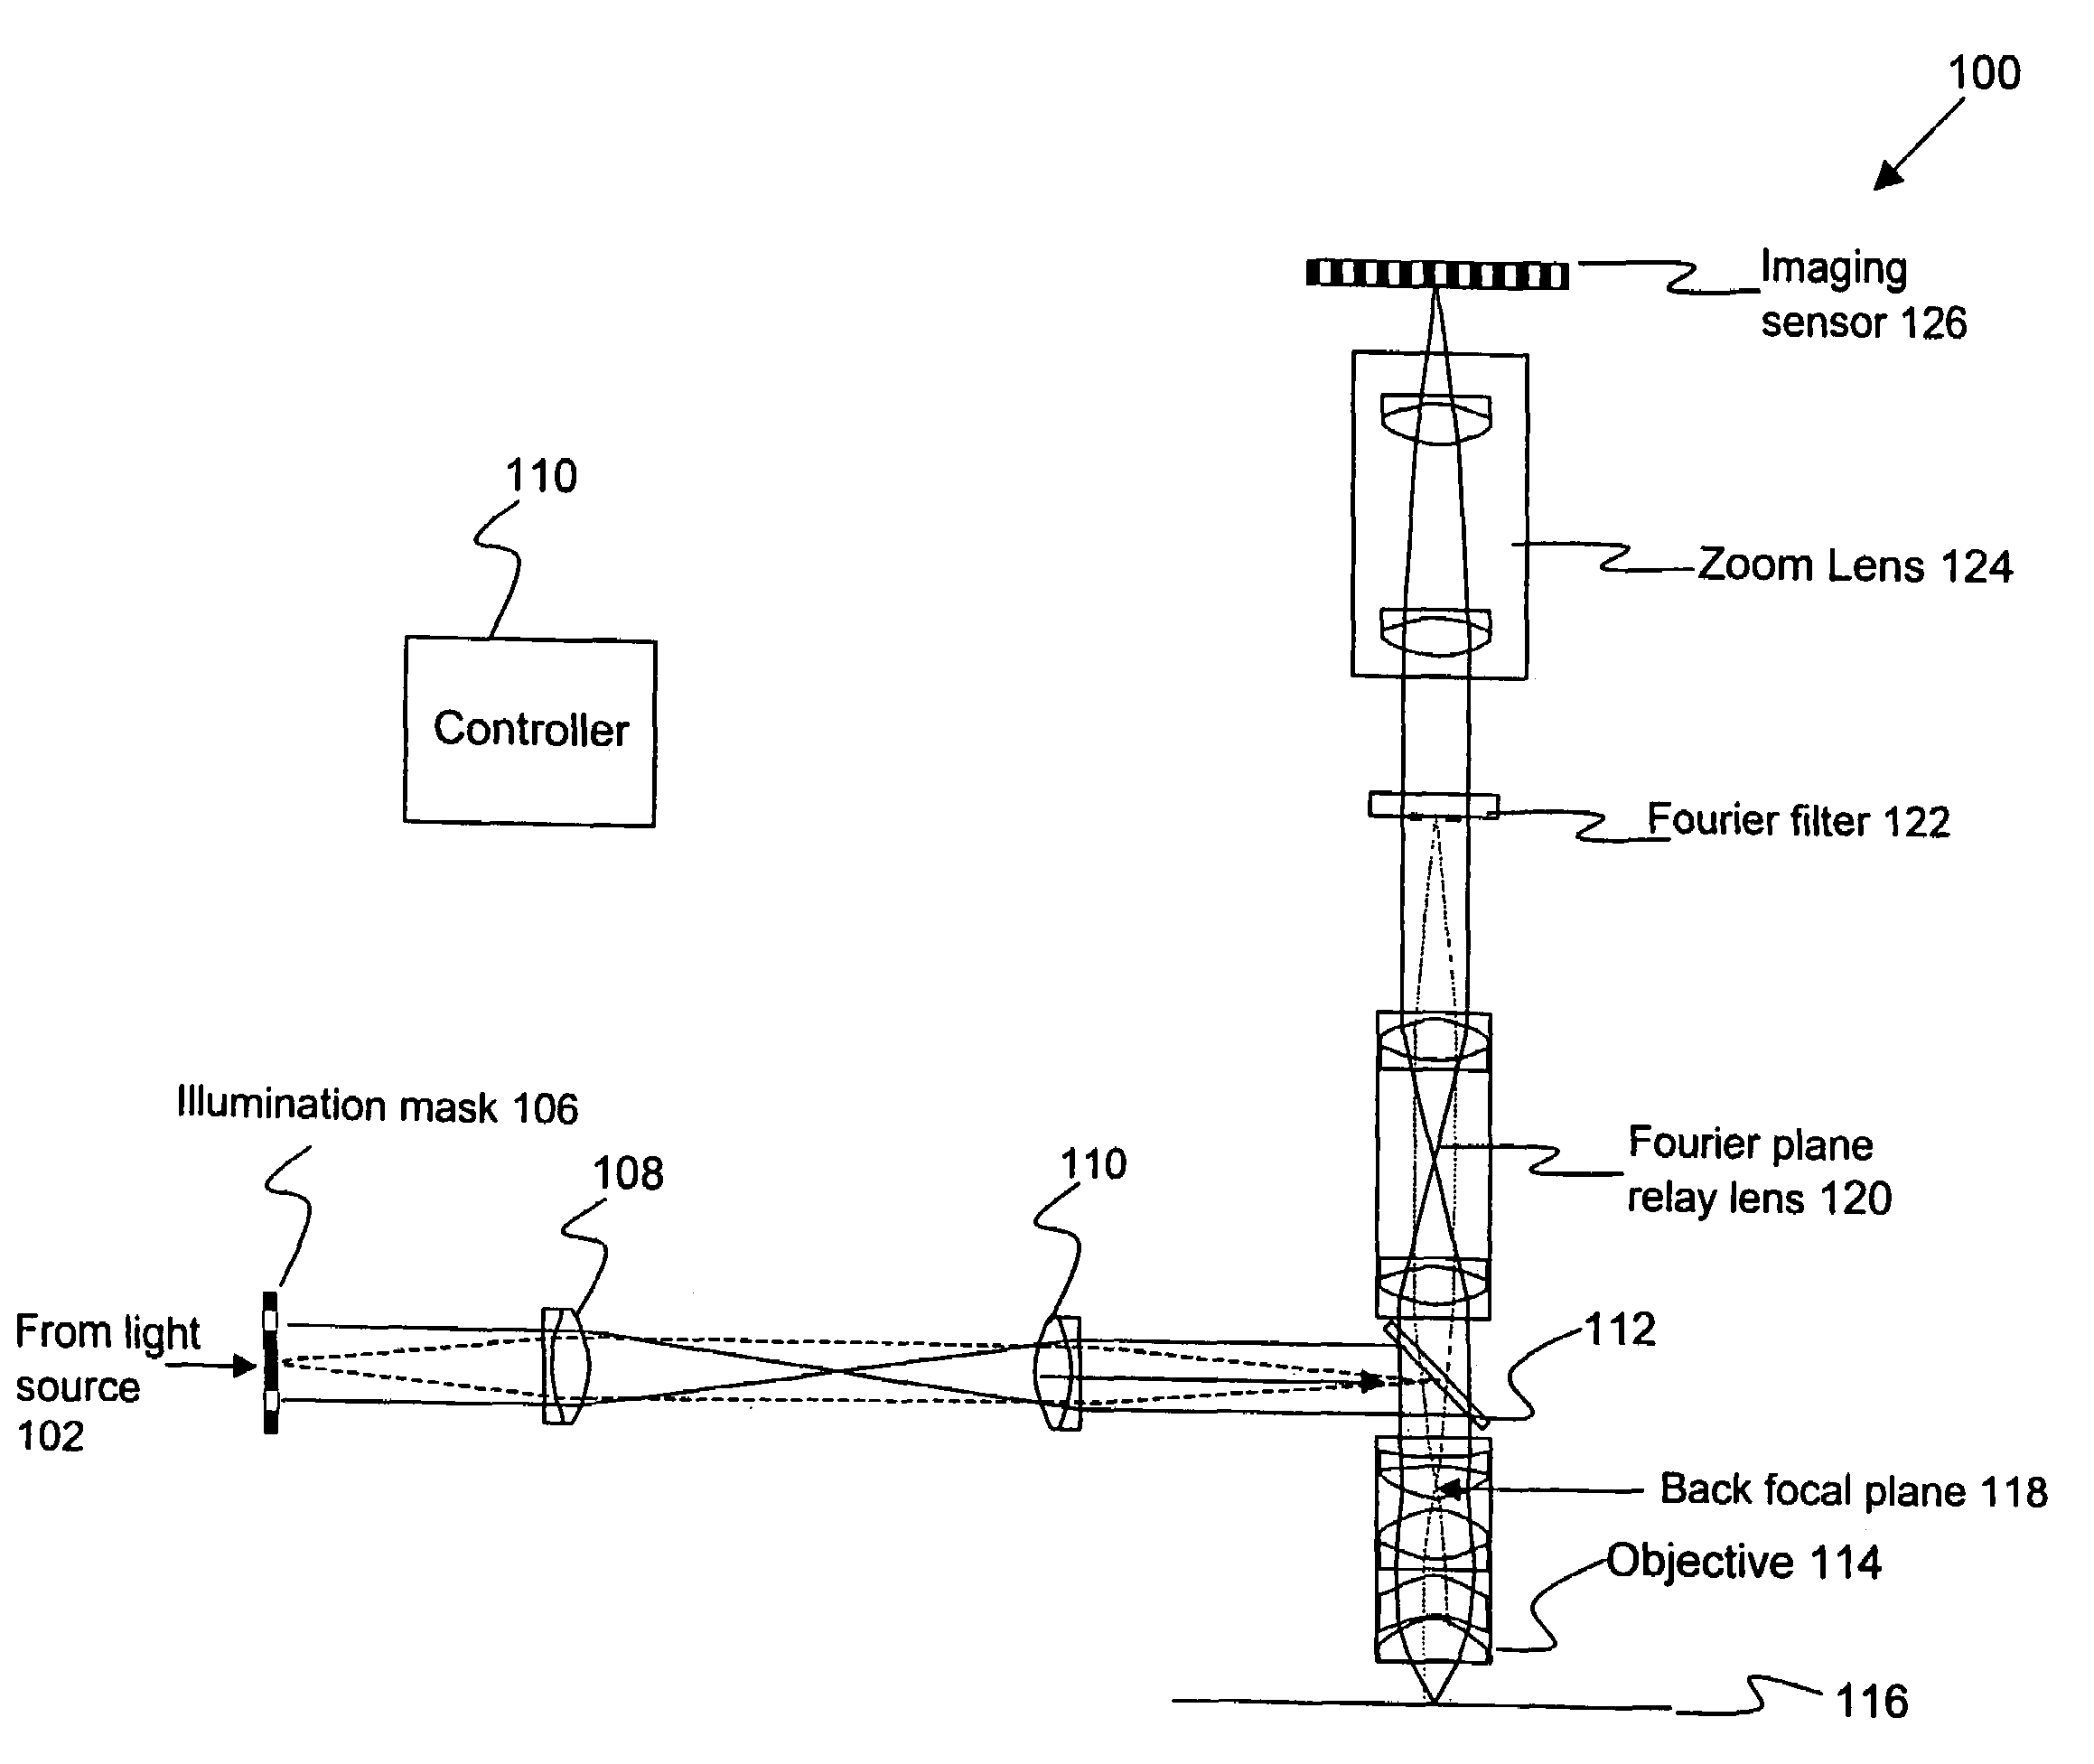 Methods and apparatus for inspecting a sample